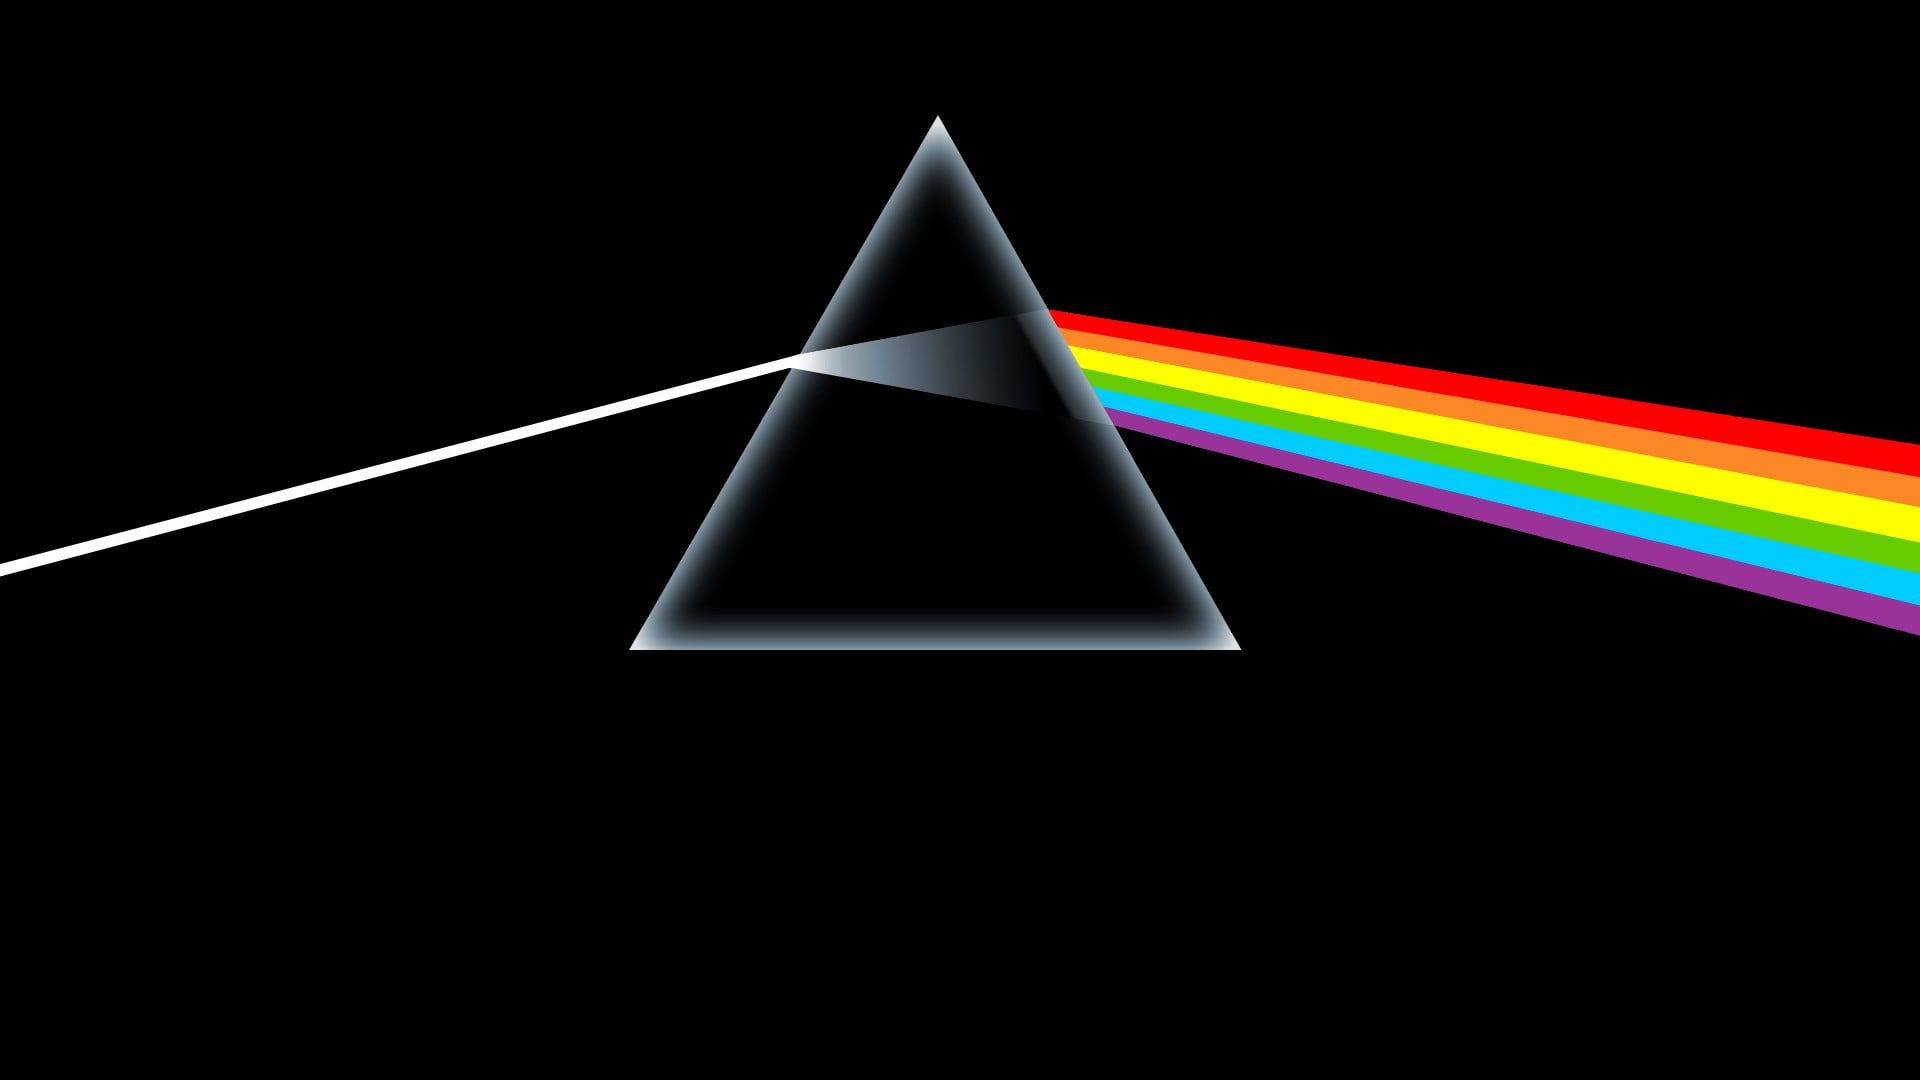 1920x1080 The Dark Side of the Moon by Pink Floyd wallpaper Pink Floyd #prism album covers cover art #1080P #wallpap&acirc;&#128;&brvbar; | Pink floyd wallpaper, Pink floyd dark side, Pink floyd